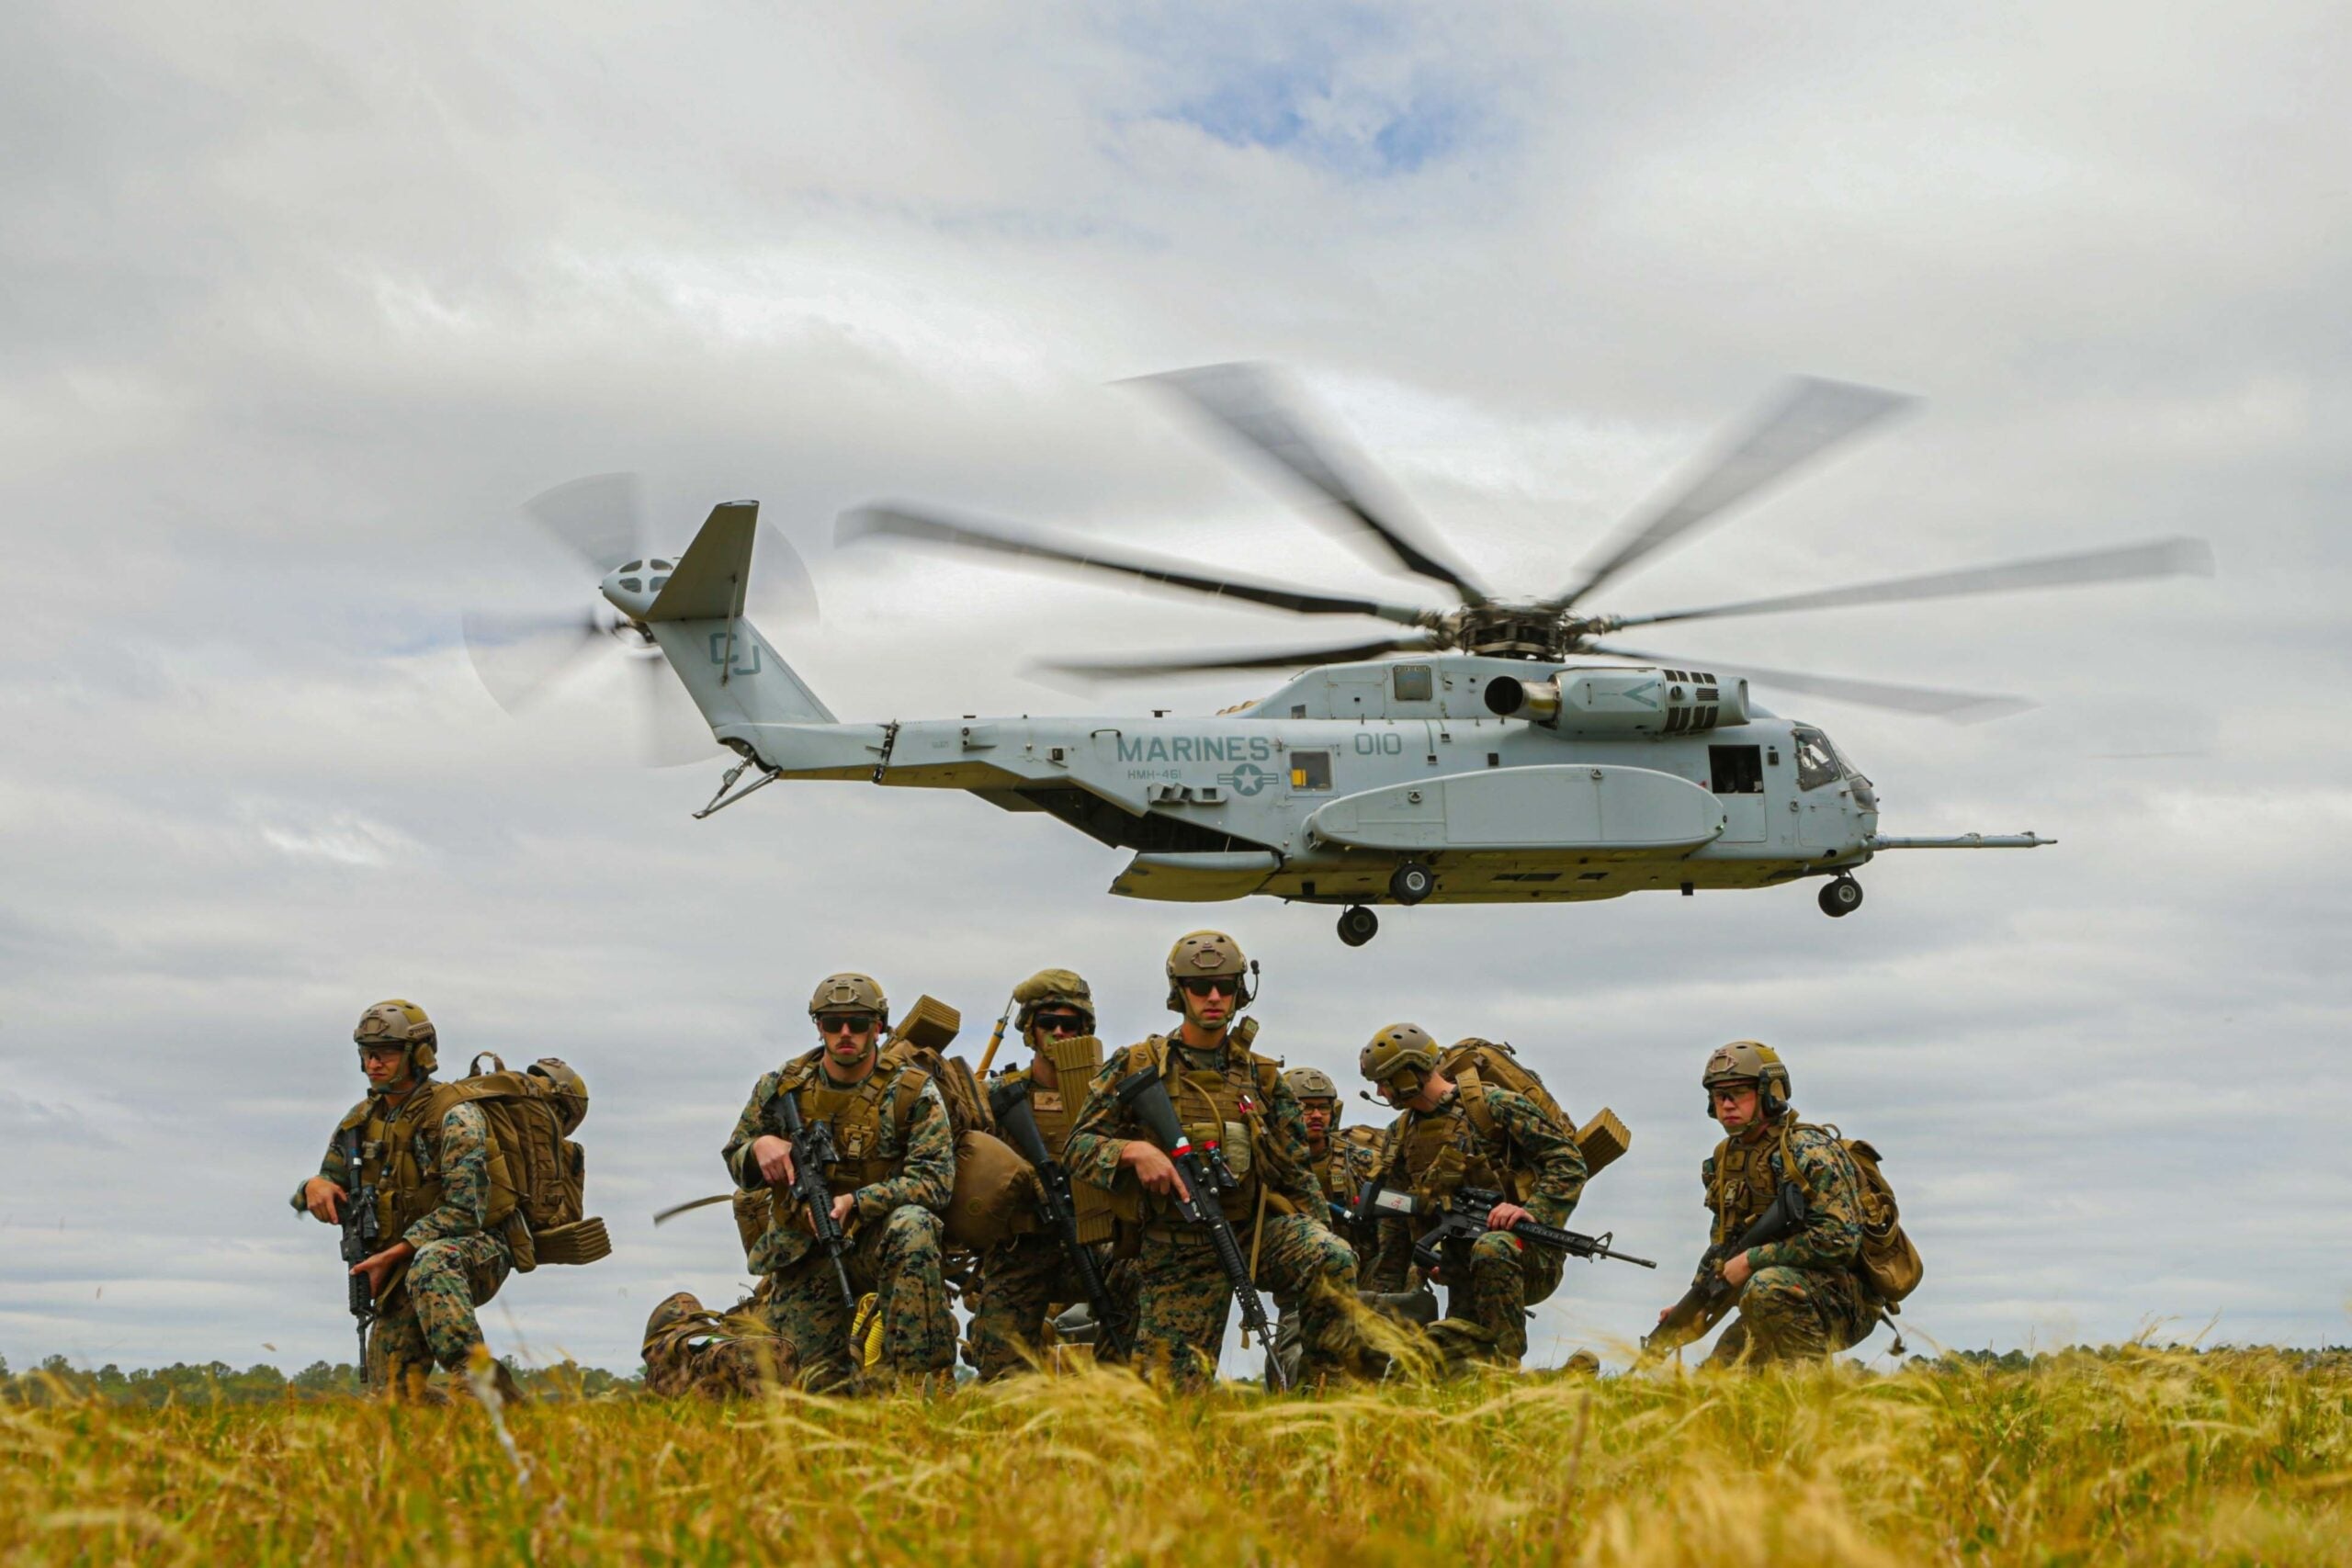 U.S. Marines with 2nd Landing Support Battalion, Combat Logistics Regiment 27, 2nd Marine Logistics Group, assess the landing zone after debarking a CH-53K King Stallion during exercise Potomac Restore, at Oak Grove, North Carolina May 11, 2022. Exercise Potomac Restore is a scenario-driven regimental exercise designed to get the regimental staff to operate in tactical support environments and incorporate unique capabilities of subordinate battalions. (U.S. Marine Corps Photos by Lance Cpl. Jackson Kirkiewicz)